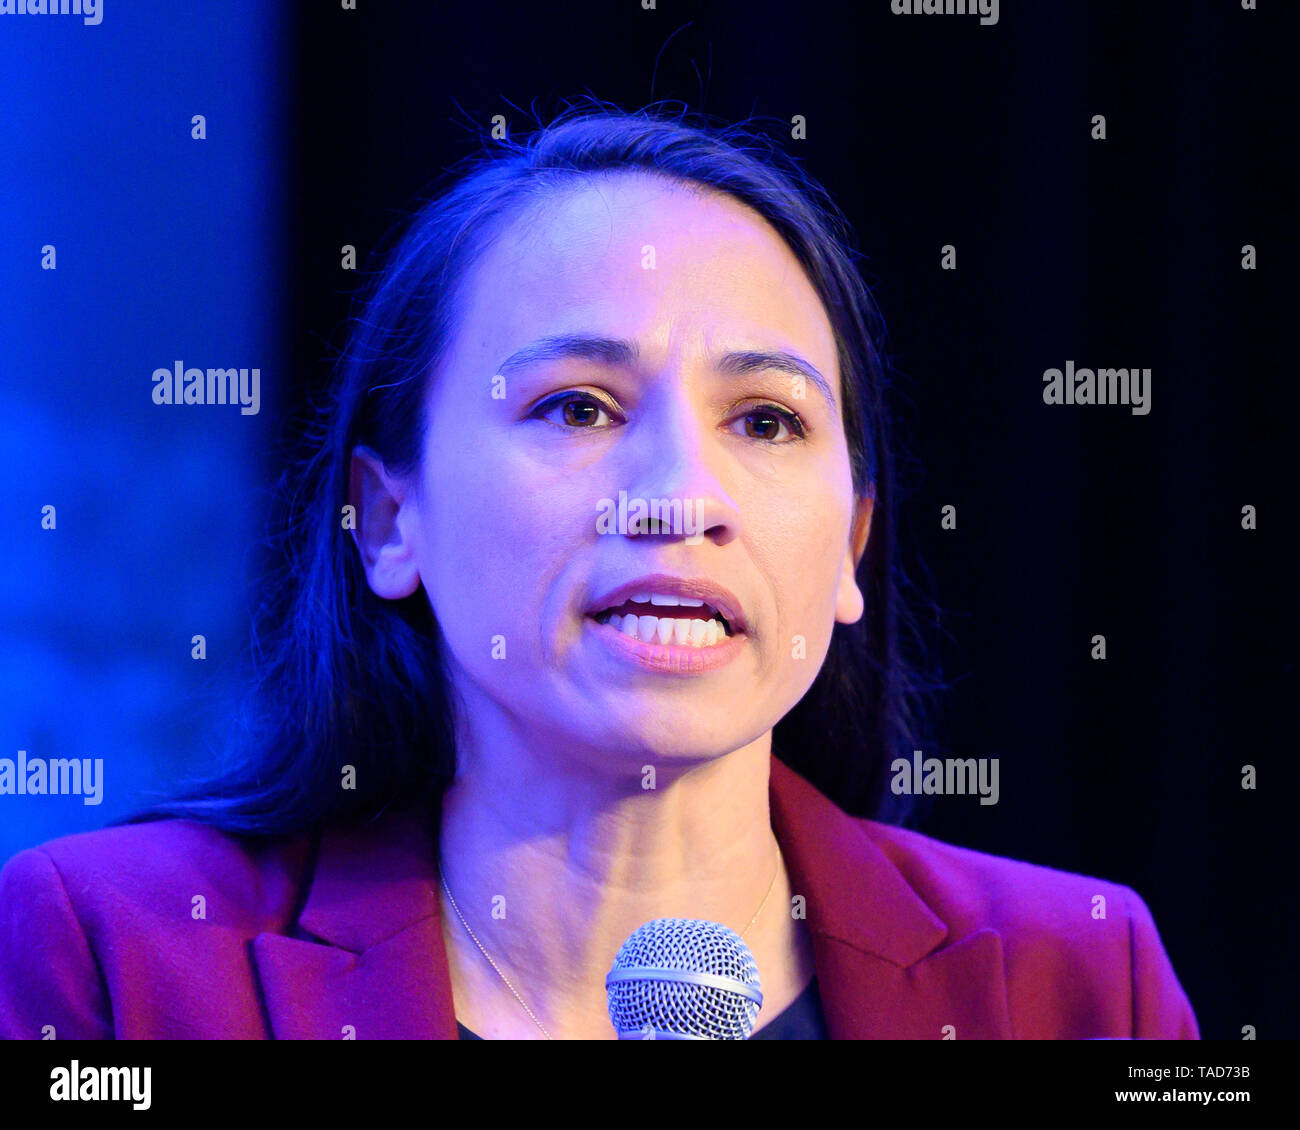 Rep. Sharice Davids (D-KS) speaking at The Center for American Progress CAP 2019 Ideas Conference. Stock Photo